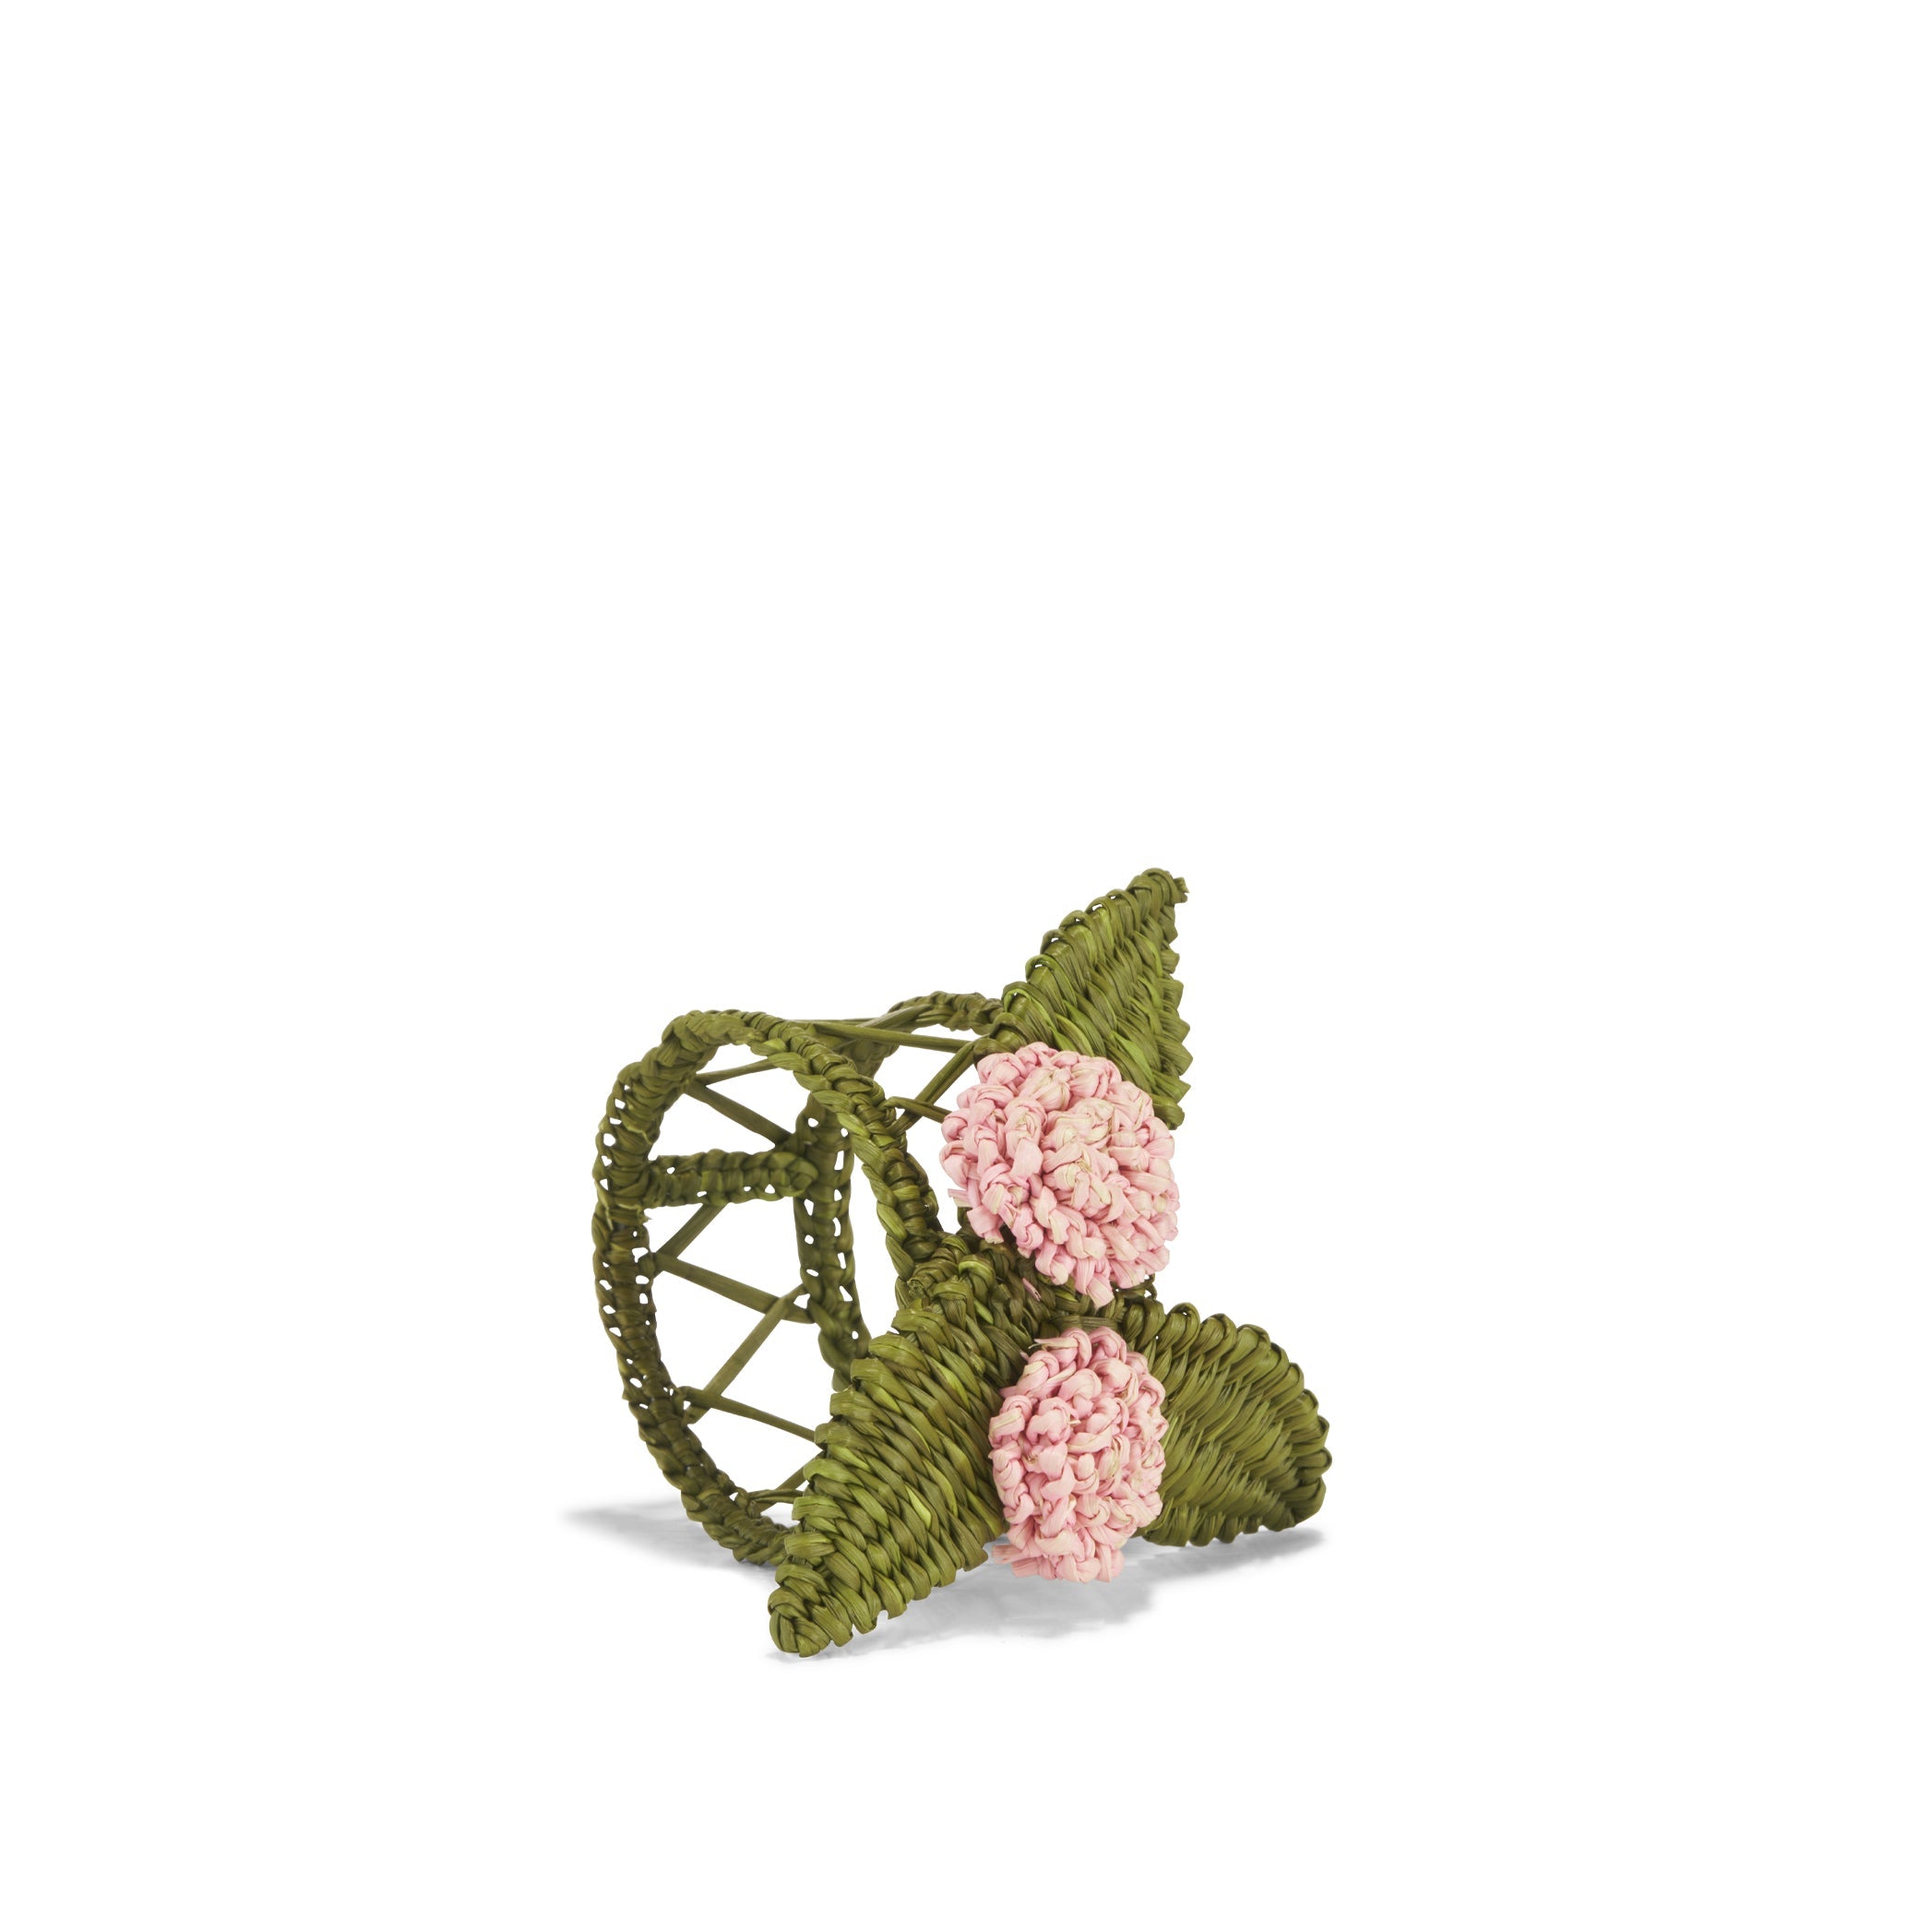 Handwoven Roses Napkin Ring in Pink and Olive Green